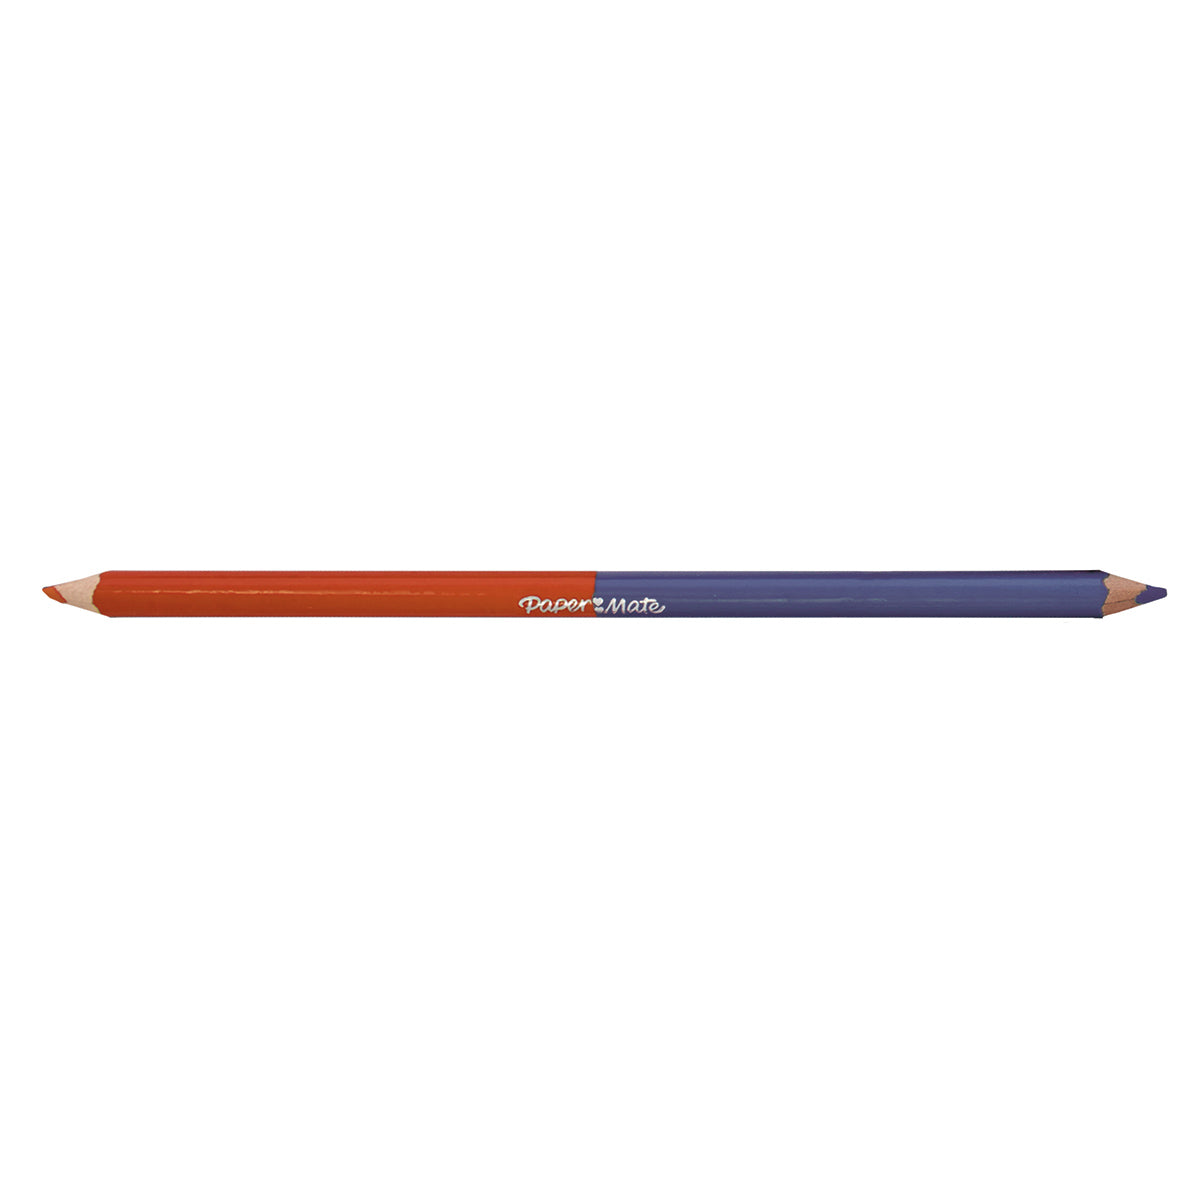 Paper Mate Geranium Red Prussian Blue Colored Pencil Dual Ended  Paper Mate Pencils